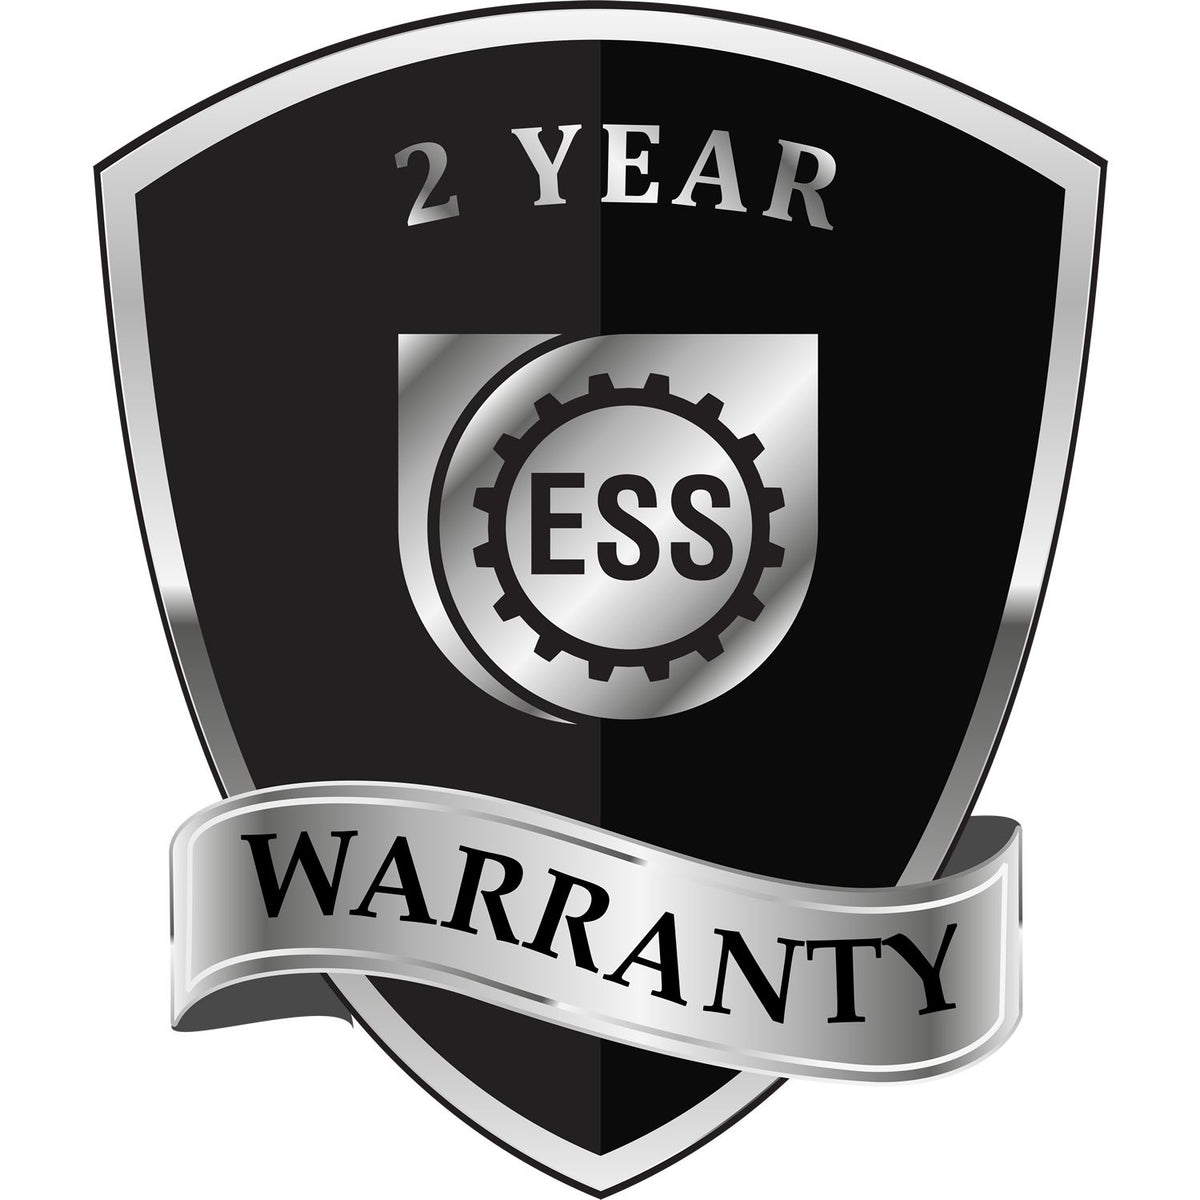 A badge or emblem showing a warranty icon for the State of Alabama Extended Long Reach Engineer Seal